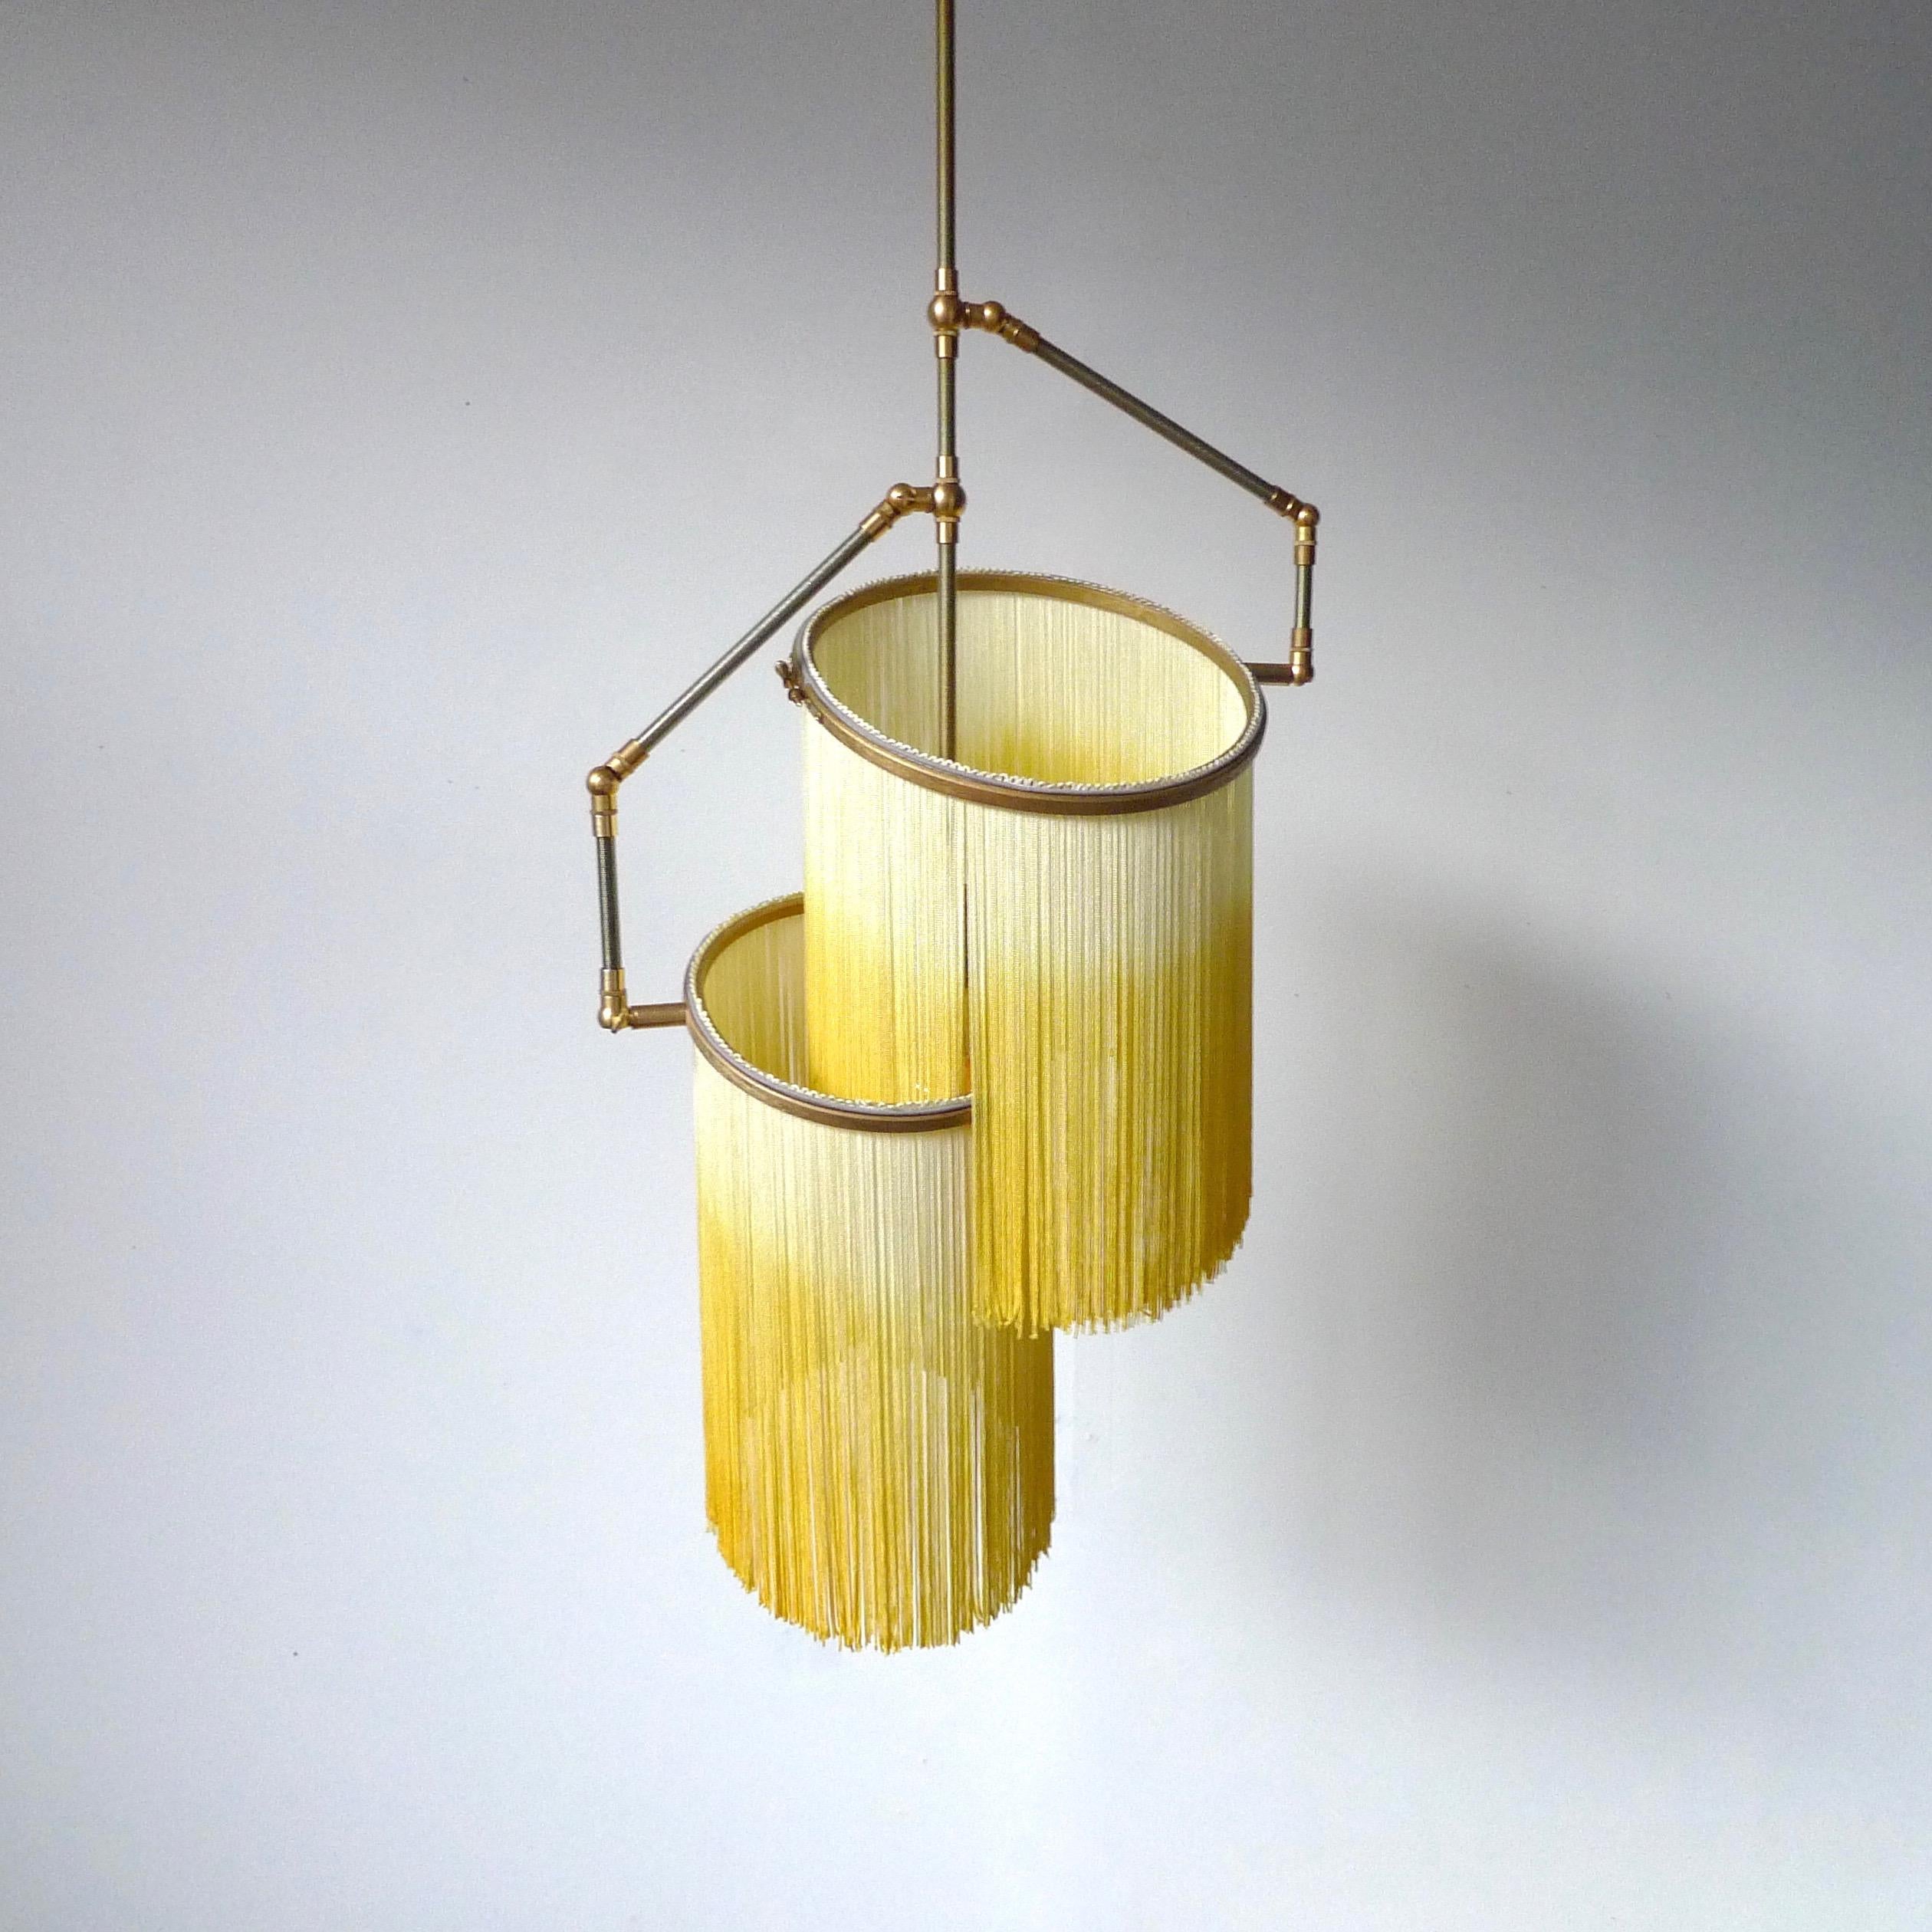 Yellow Charme pendant lamp, Sander Bottinga.

Dimensions: H 45 (can be customized) x W 38 x D 25 cm.
Hand-sculpted in brass, leather, wood and dip dyed colored Fringes in viscose.
The movable arms makes it possible to move the circles with